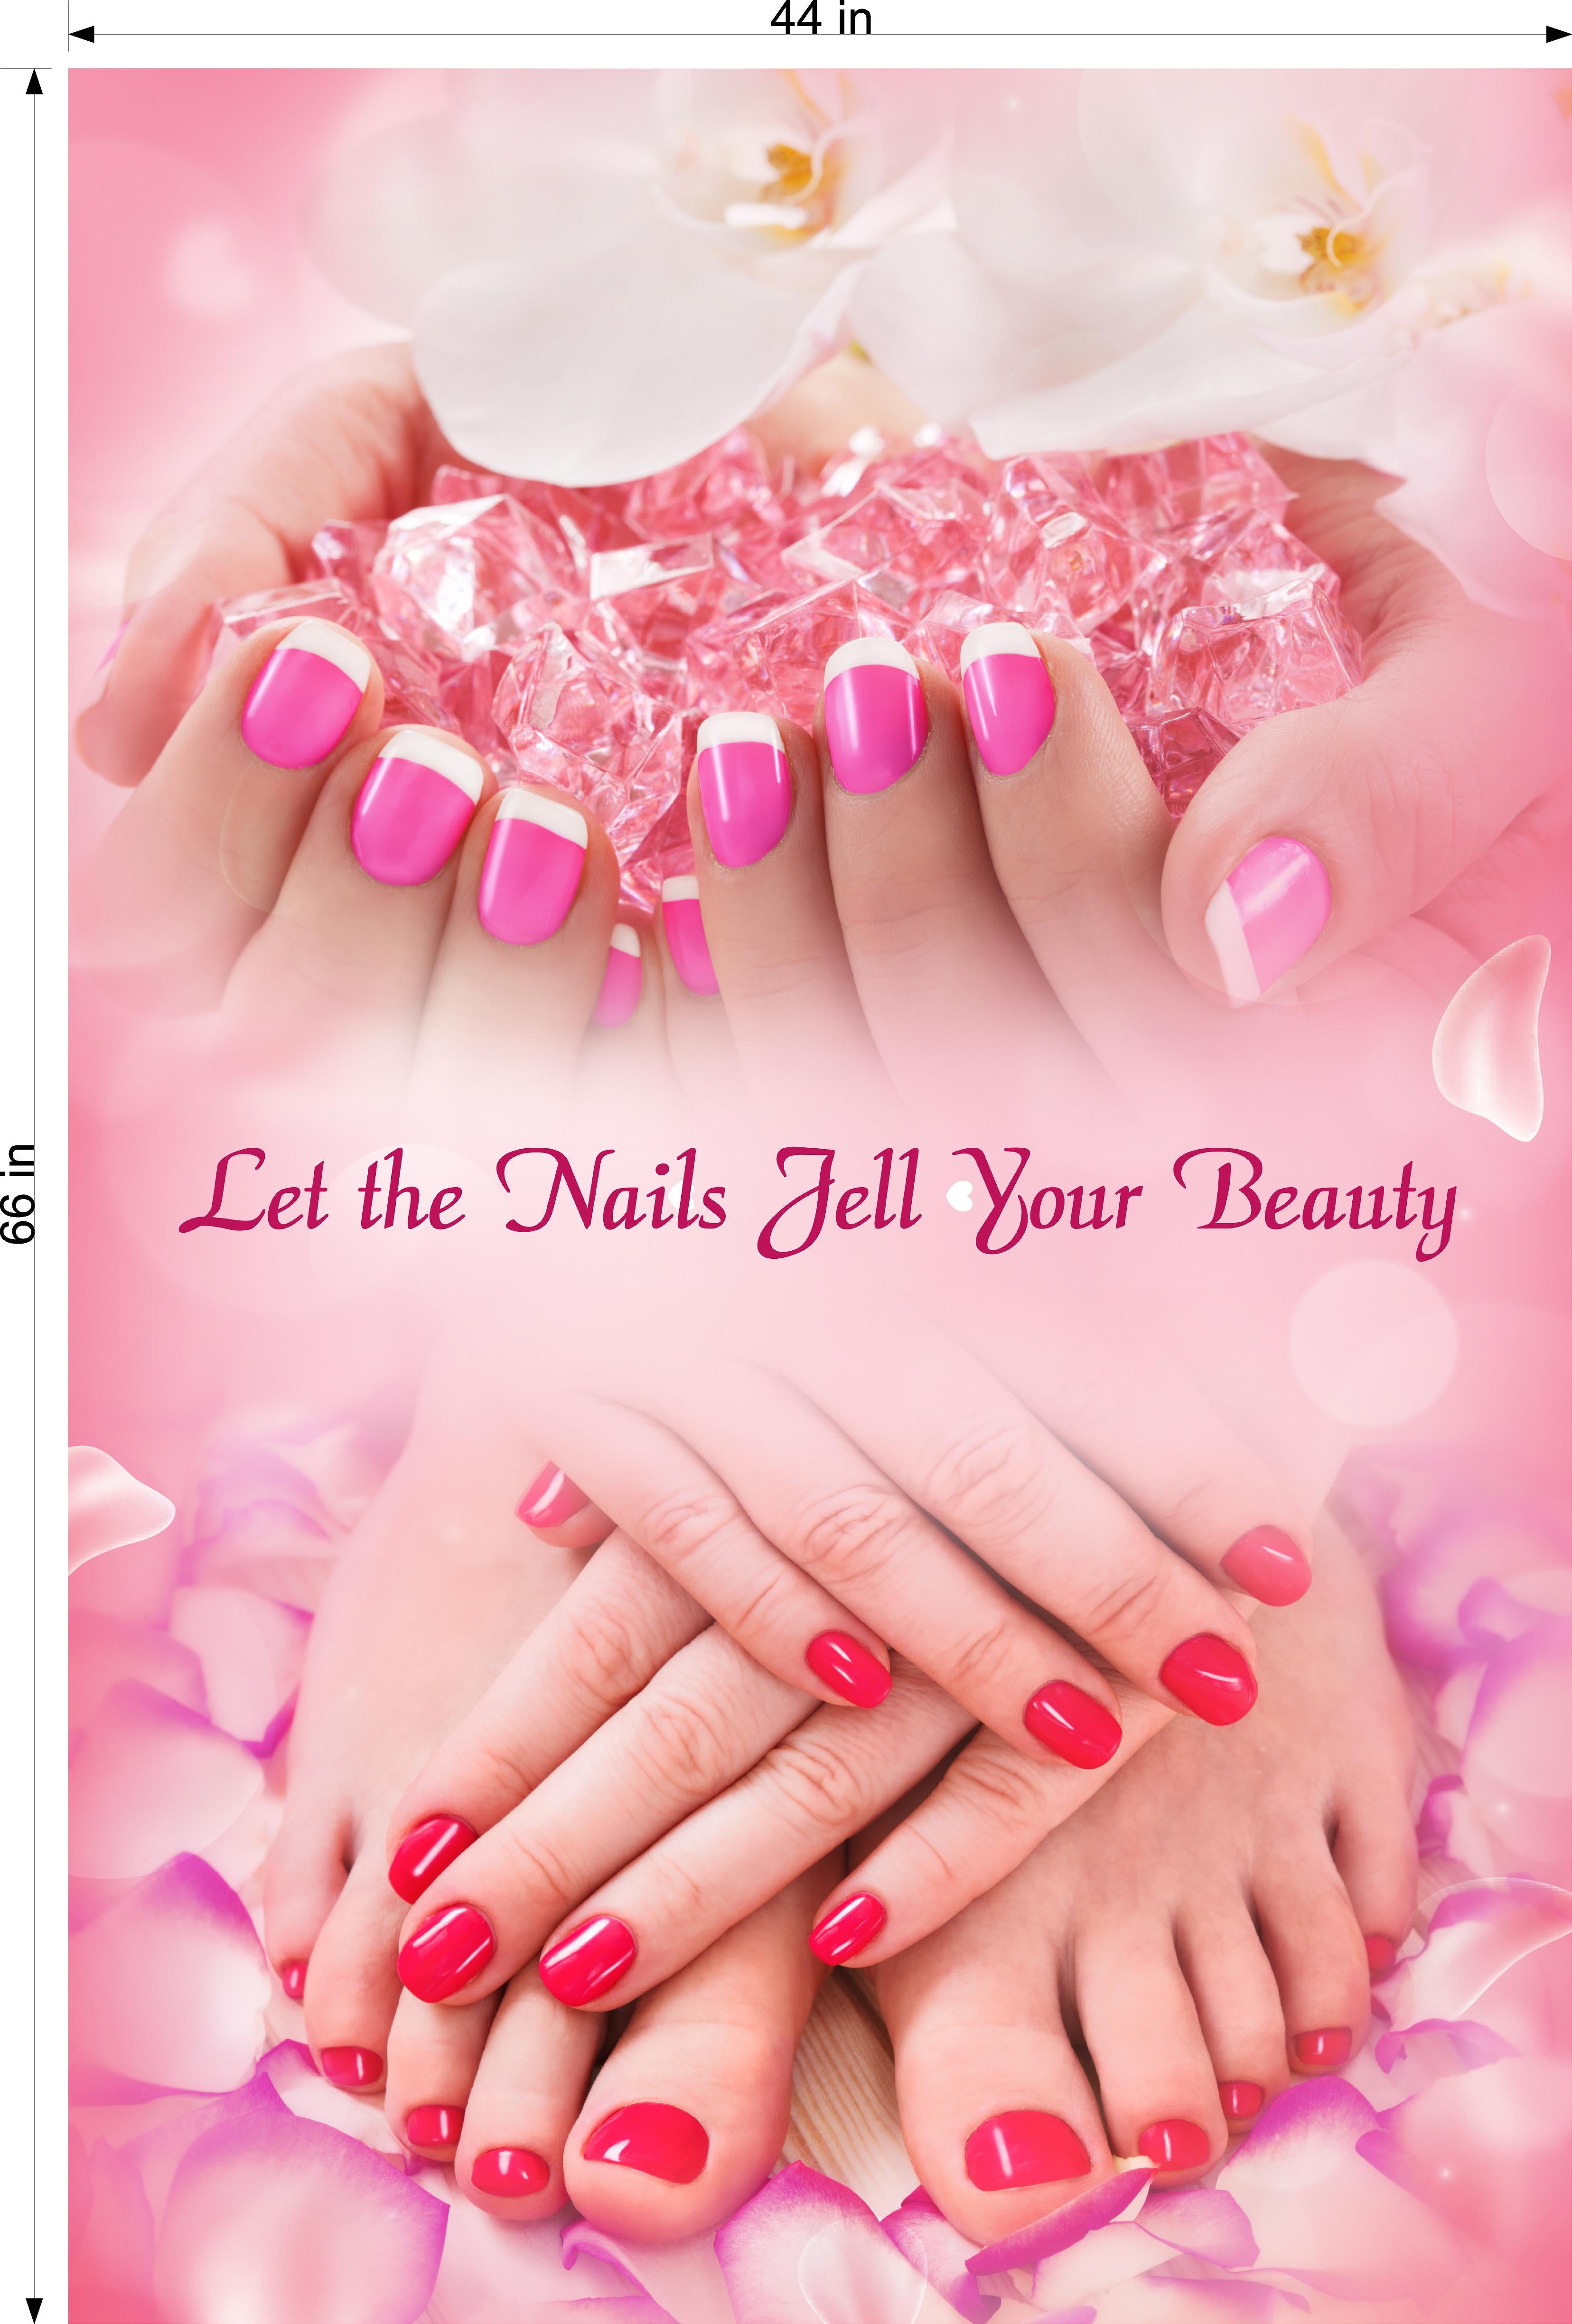 Nail Salon Poster Template and Ideas for Design | Fotor